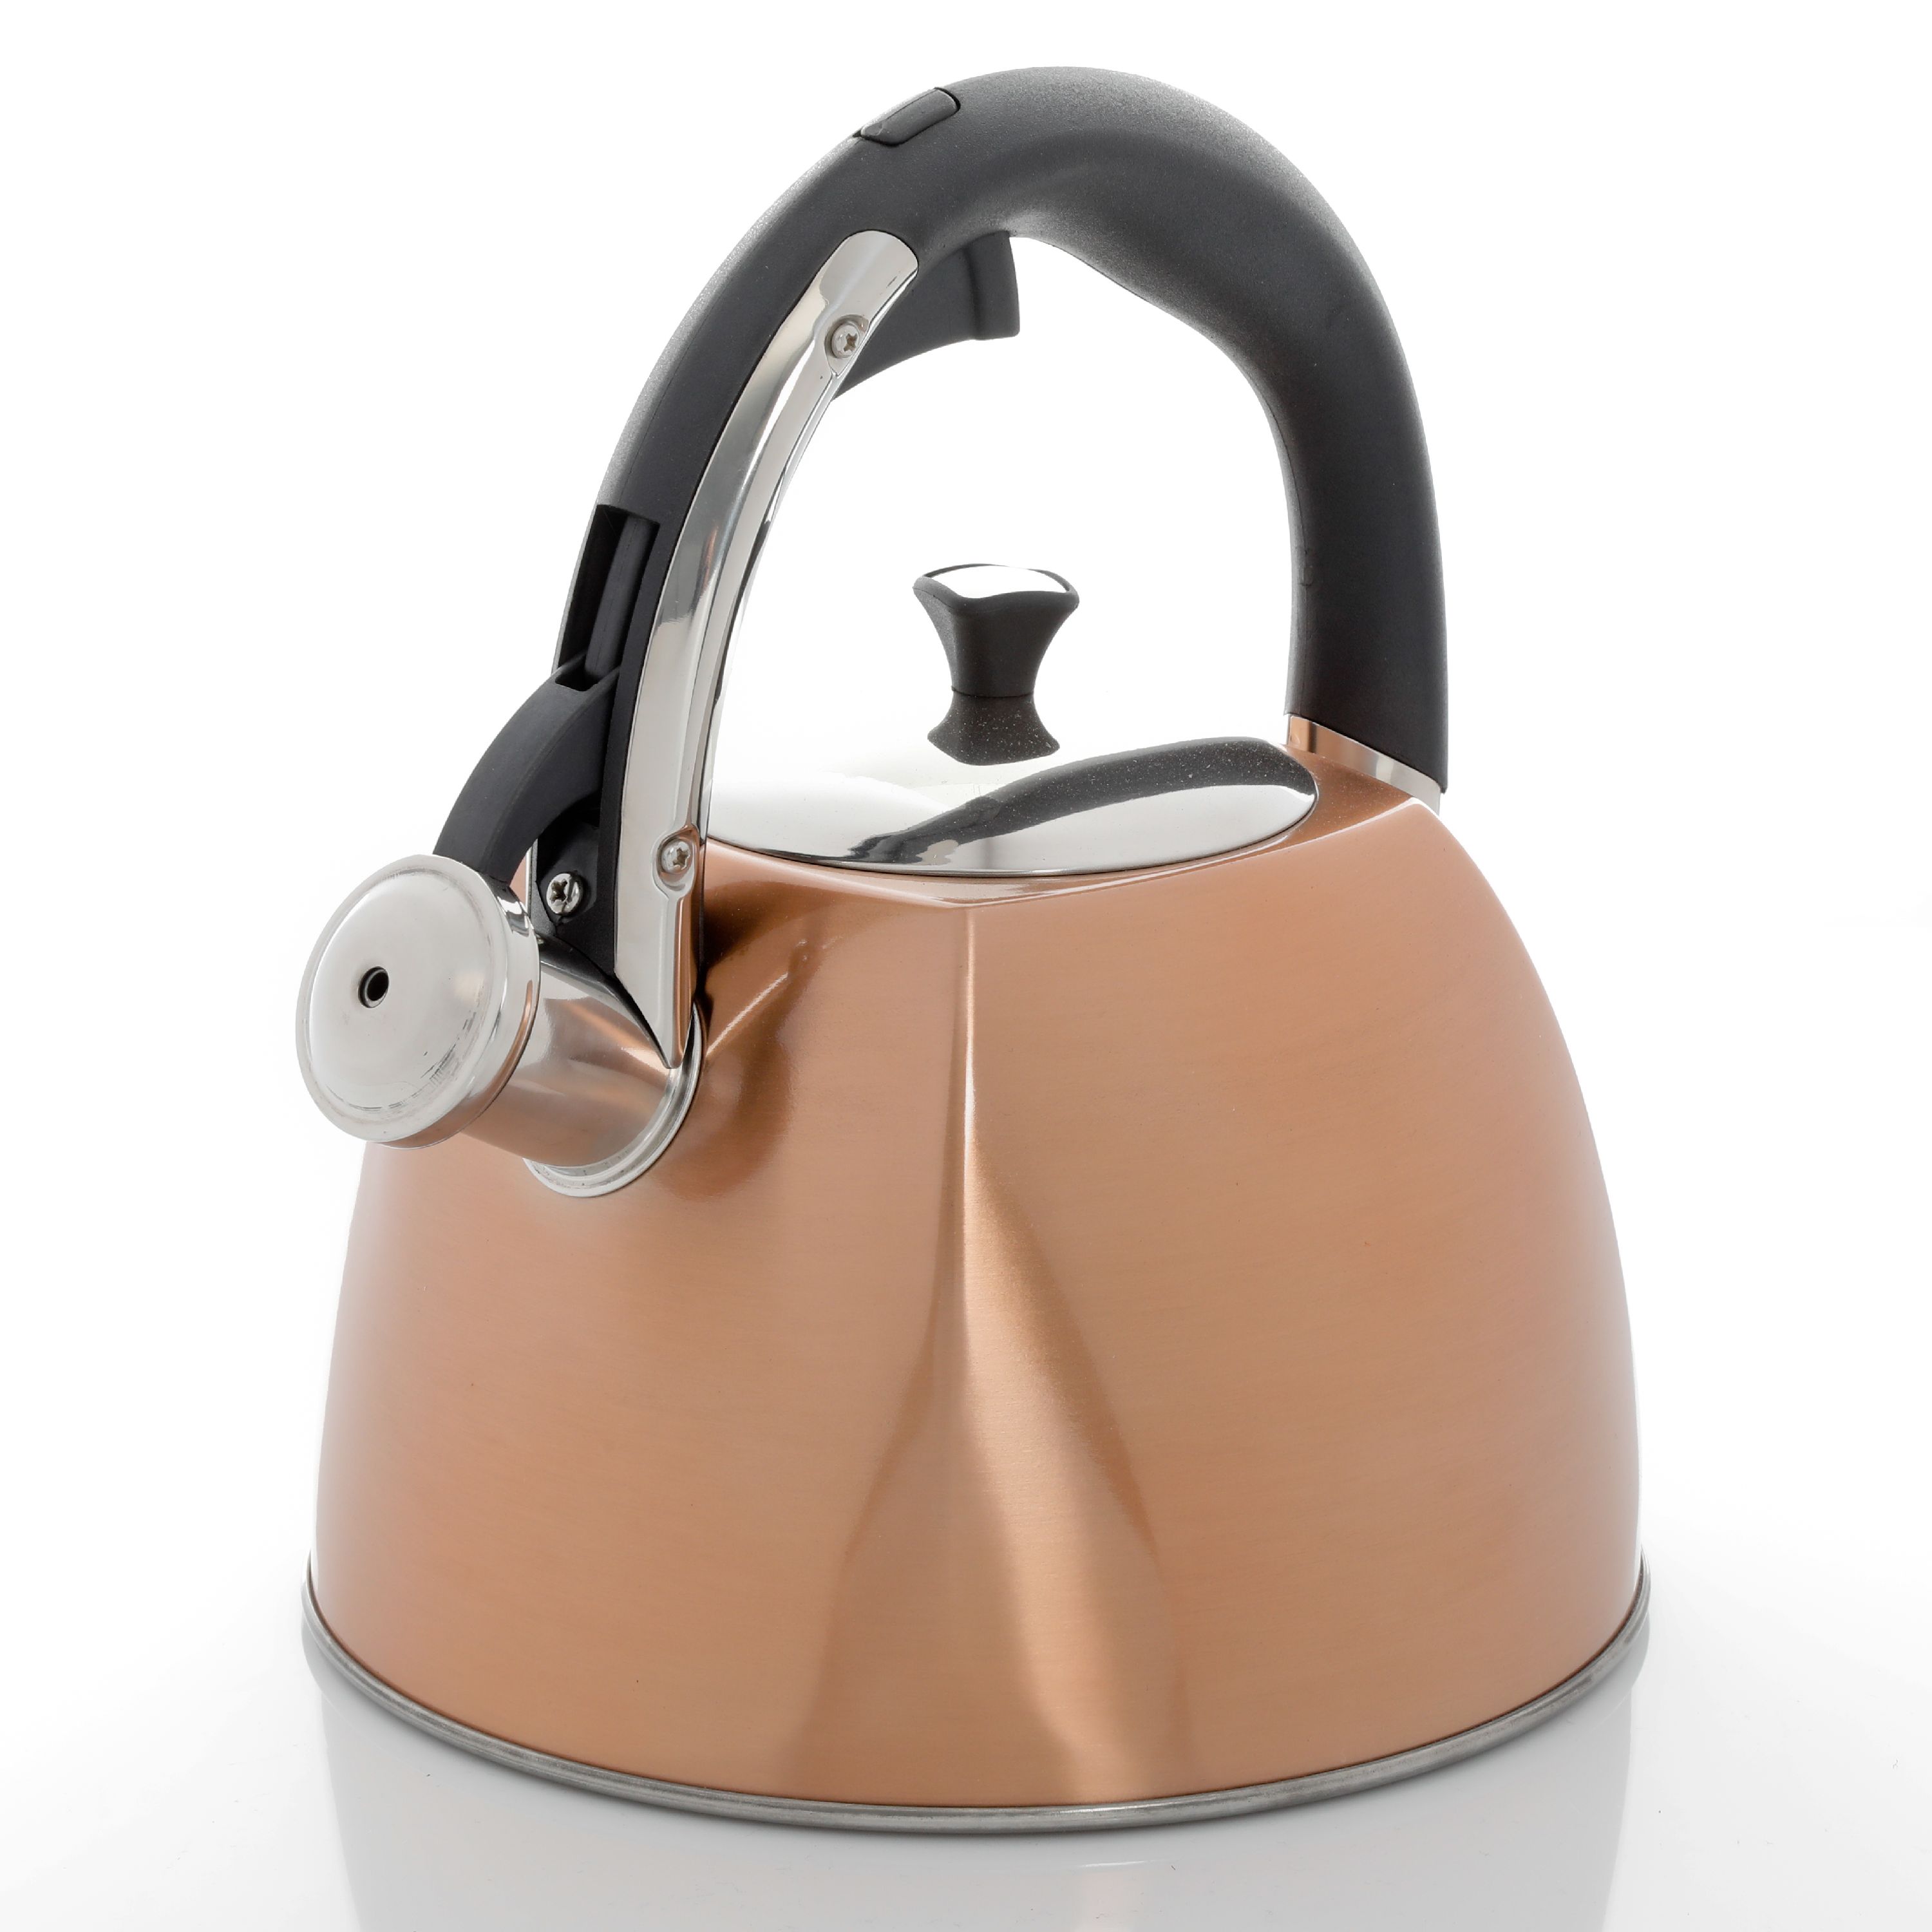 Mr. Coffee Belgrove 2.5 Quart Stainless Steel Tea Kettle in Copper - image 3 of 7